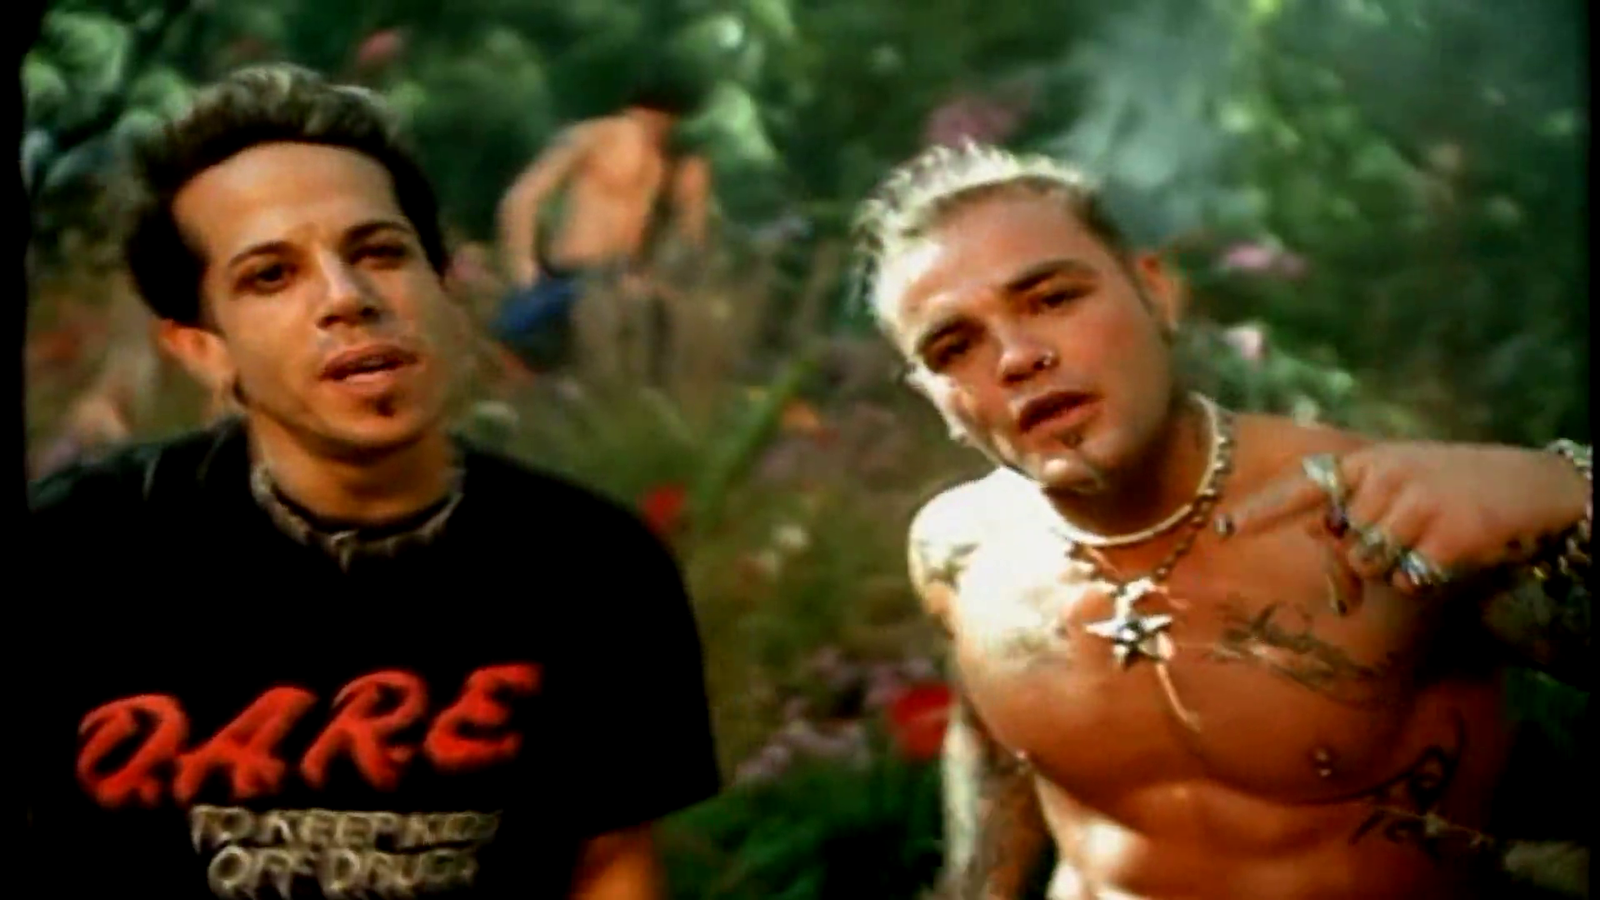 a screenshot of the boys in a field from the video